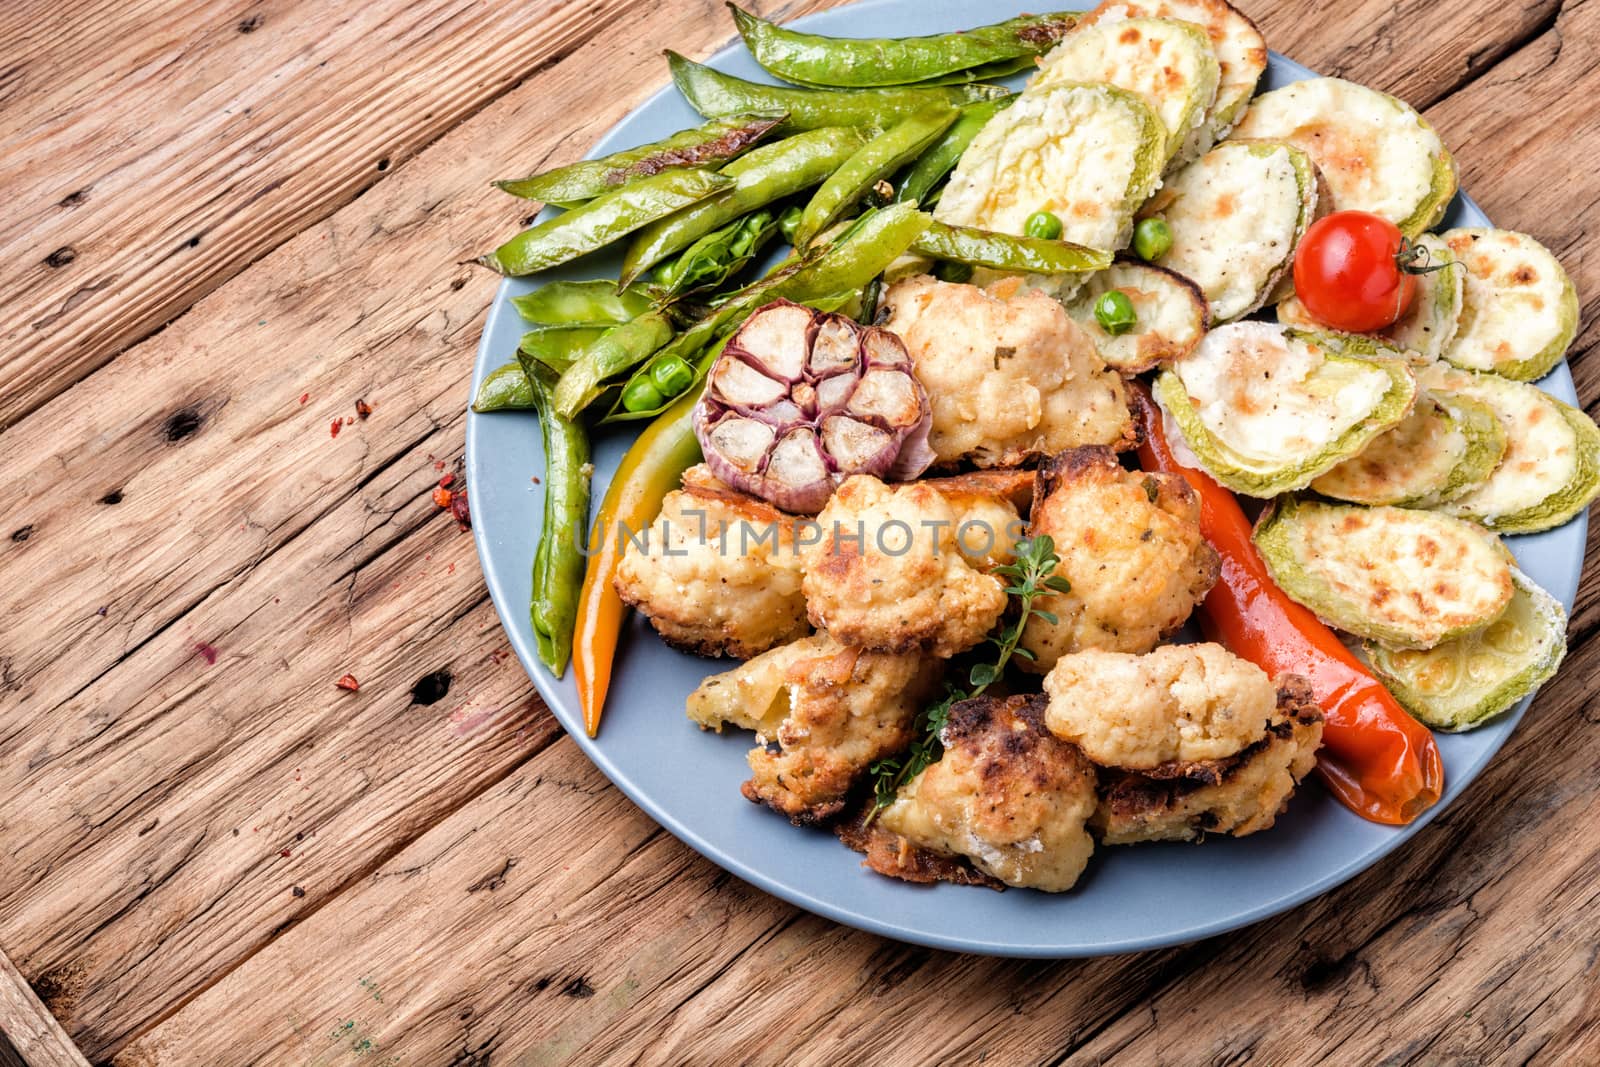 Grilled peas,roasted cauliflower and zucchini.Grill vegetables.Summer food.Large portion grilled vegetables